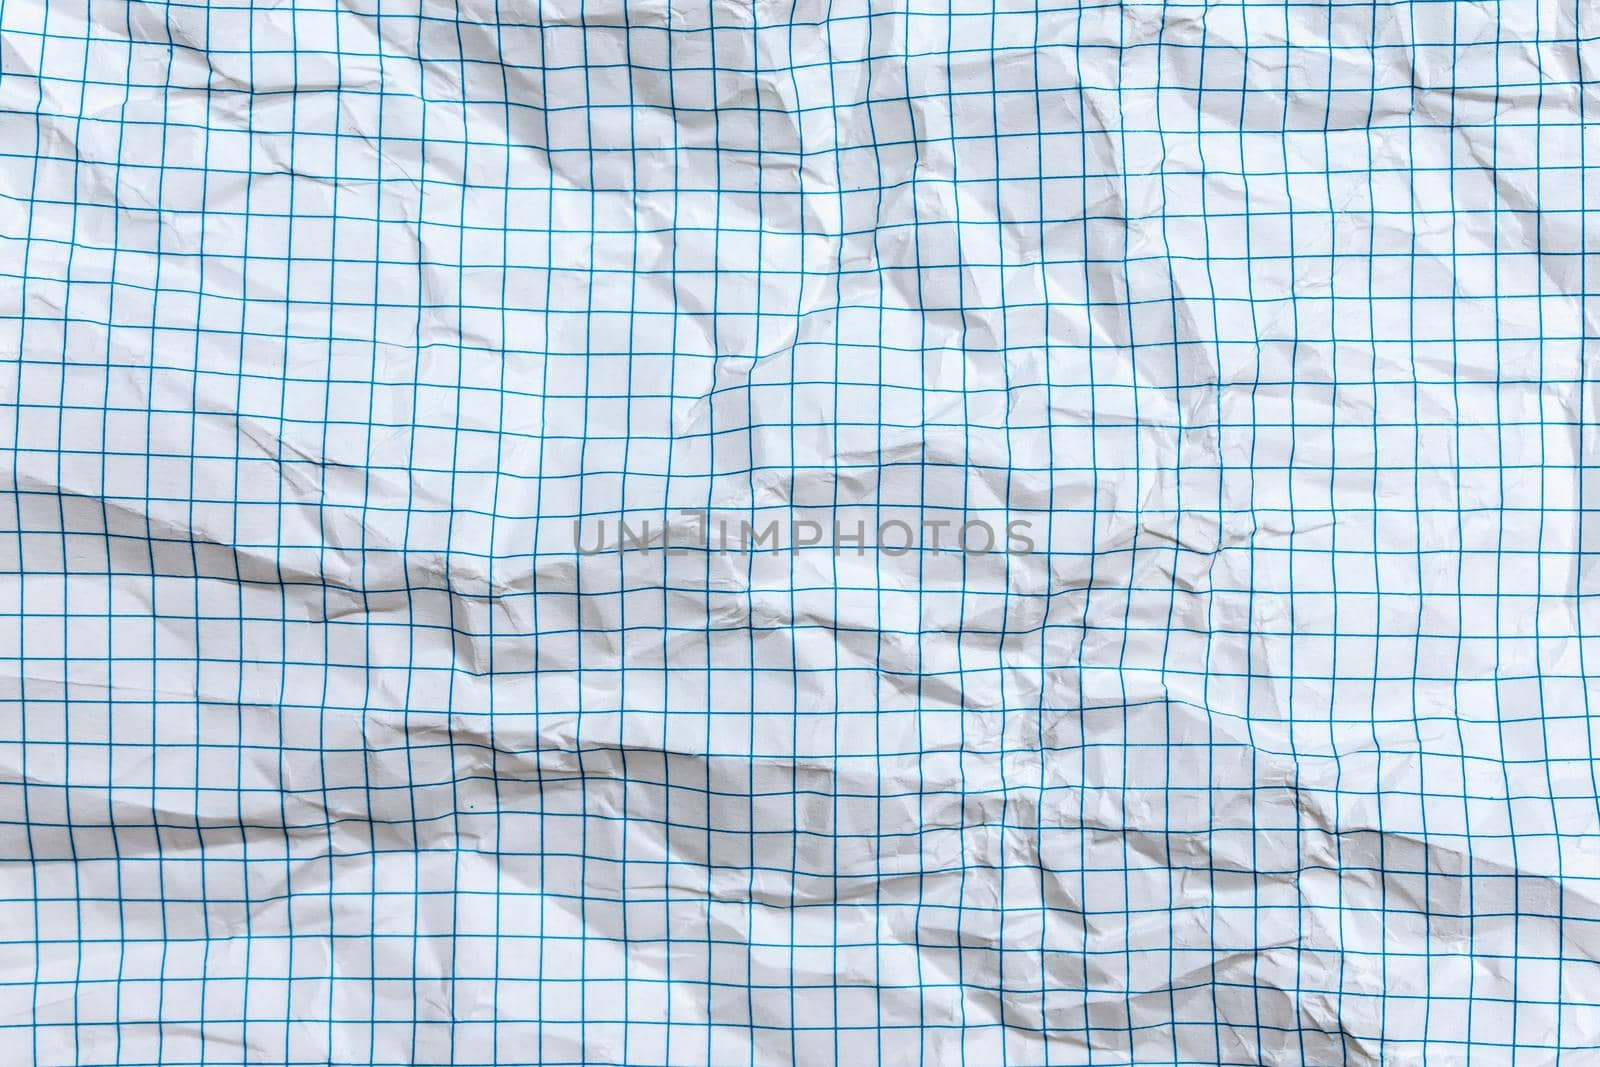 Background, texture of a crumpled notebook sheet with grid-like markings